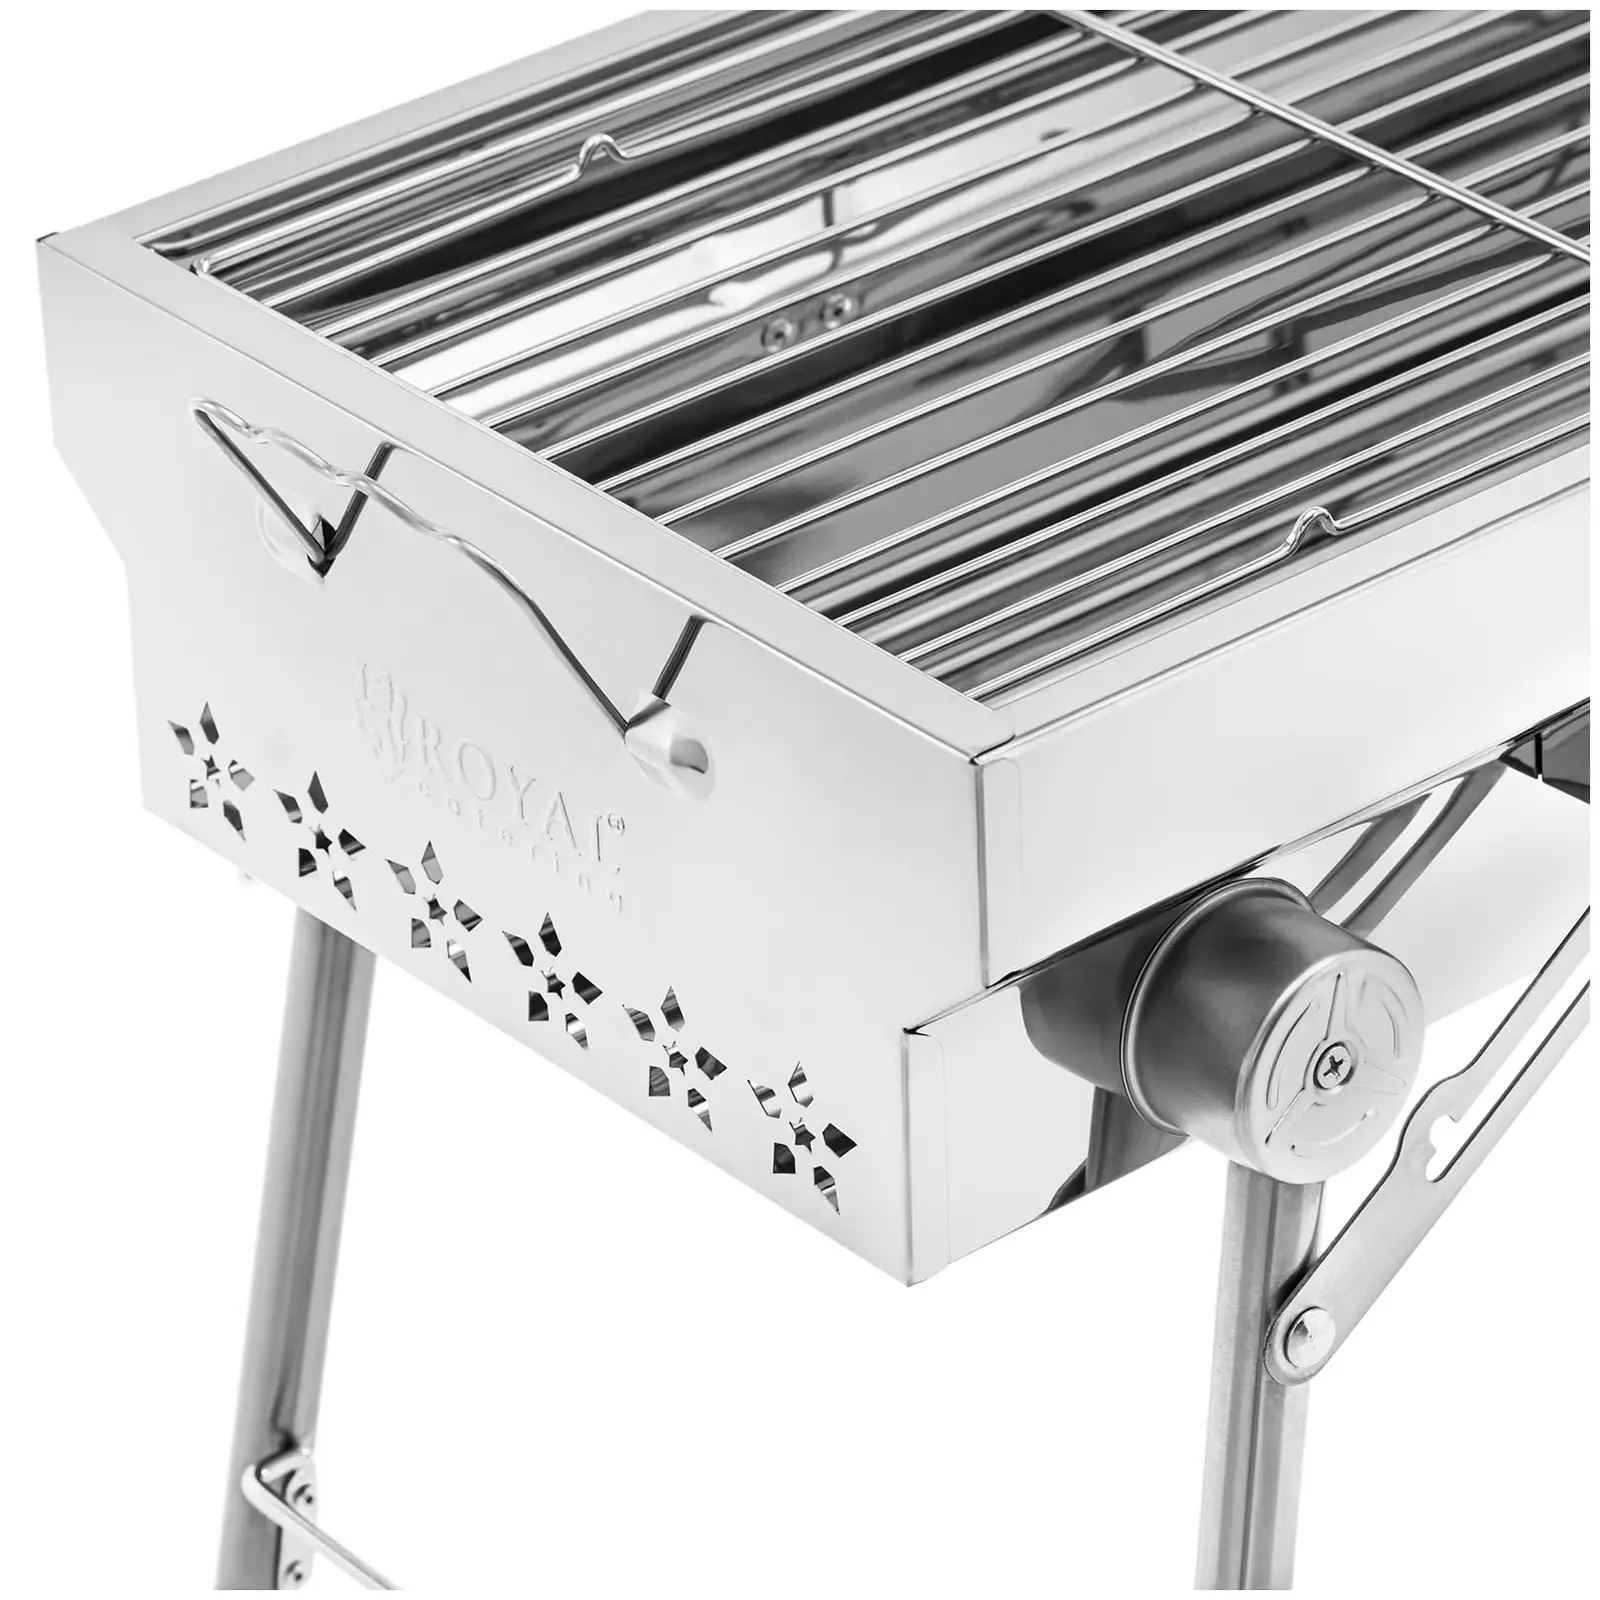 Charcoal Grill - with grate - 75 x 26 cm - stainless steel / galvanised steel - Royal Catering